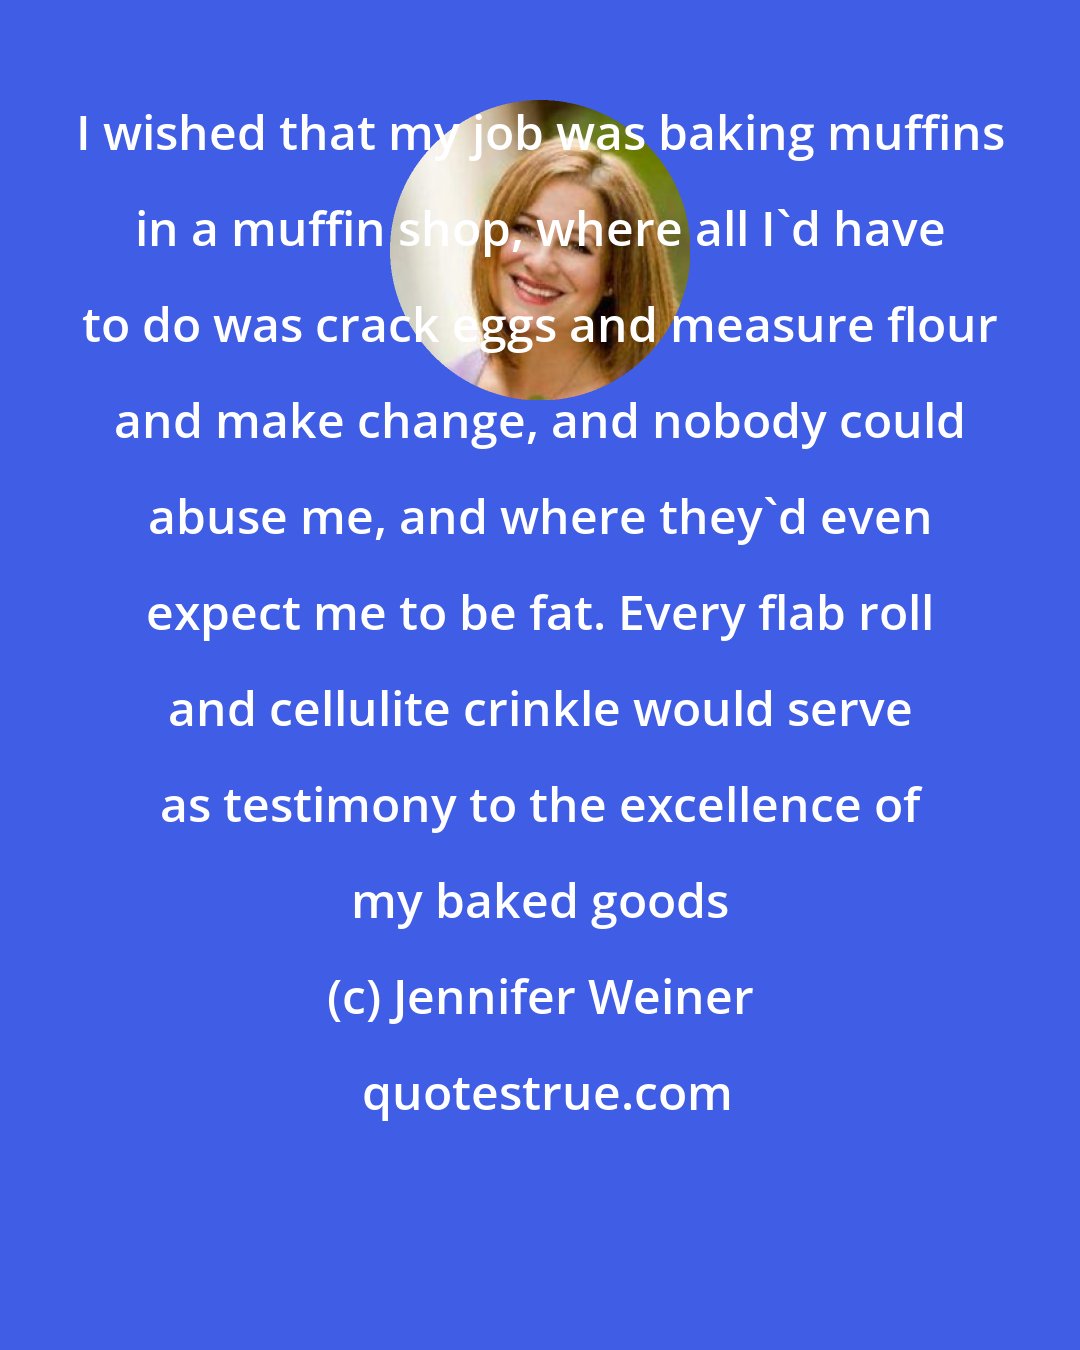 Jennifer Weiner: I wished that my job was baking muffins in a muffin shop, where all I'd have to do was crack eggs and measure flour and make change, and nobody could abuse me, and where they'd even expect me to be fat. Every flab roll and cellulite crinkle would serve as testimony to the excellence of my baked goods